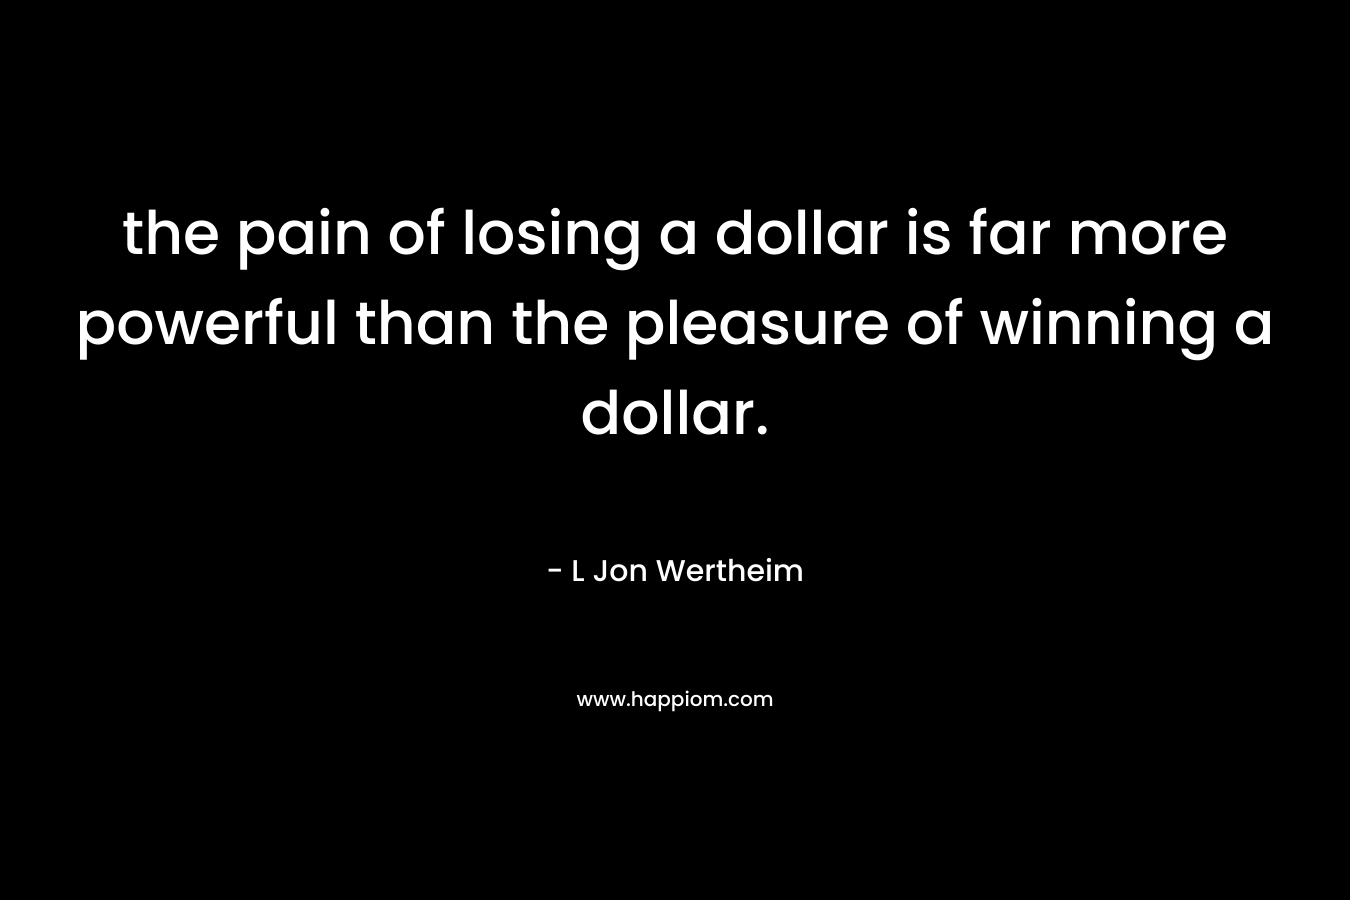 the pain of losing a dollar is far more powerful than the pleasure of winning a dollar. – L Jon Wertheim